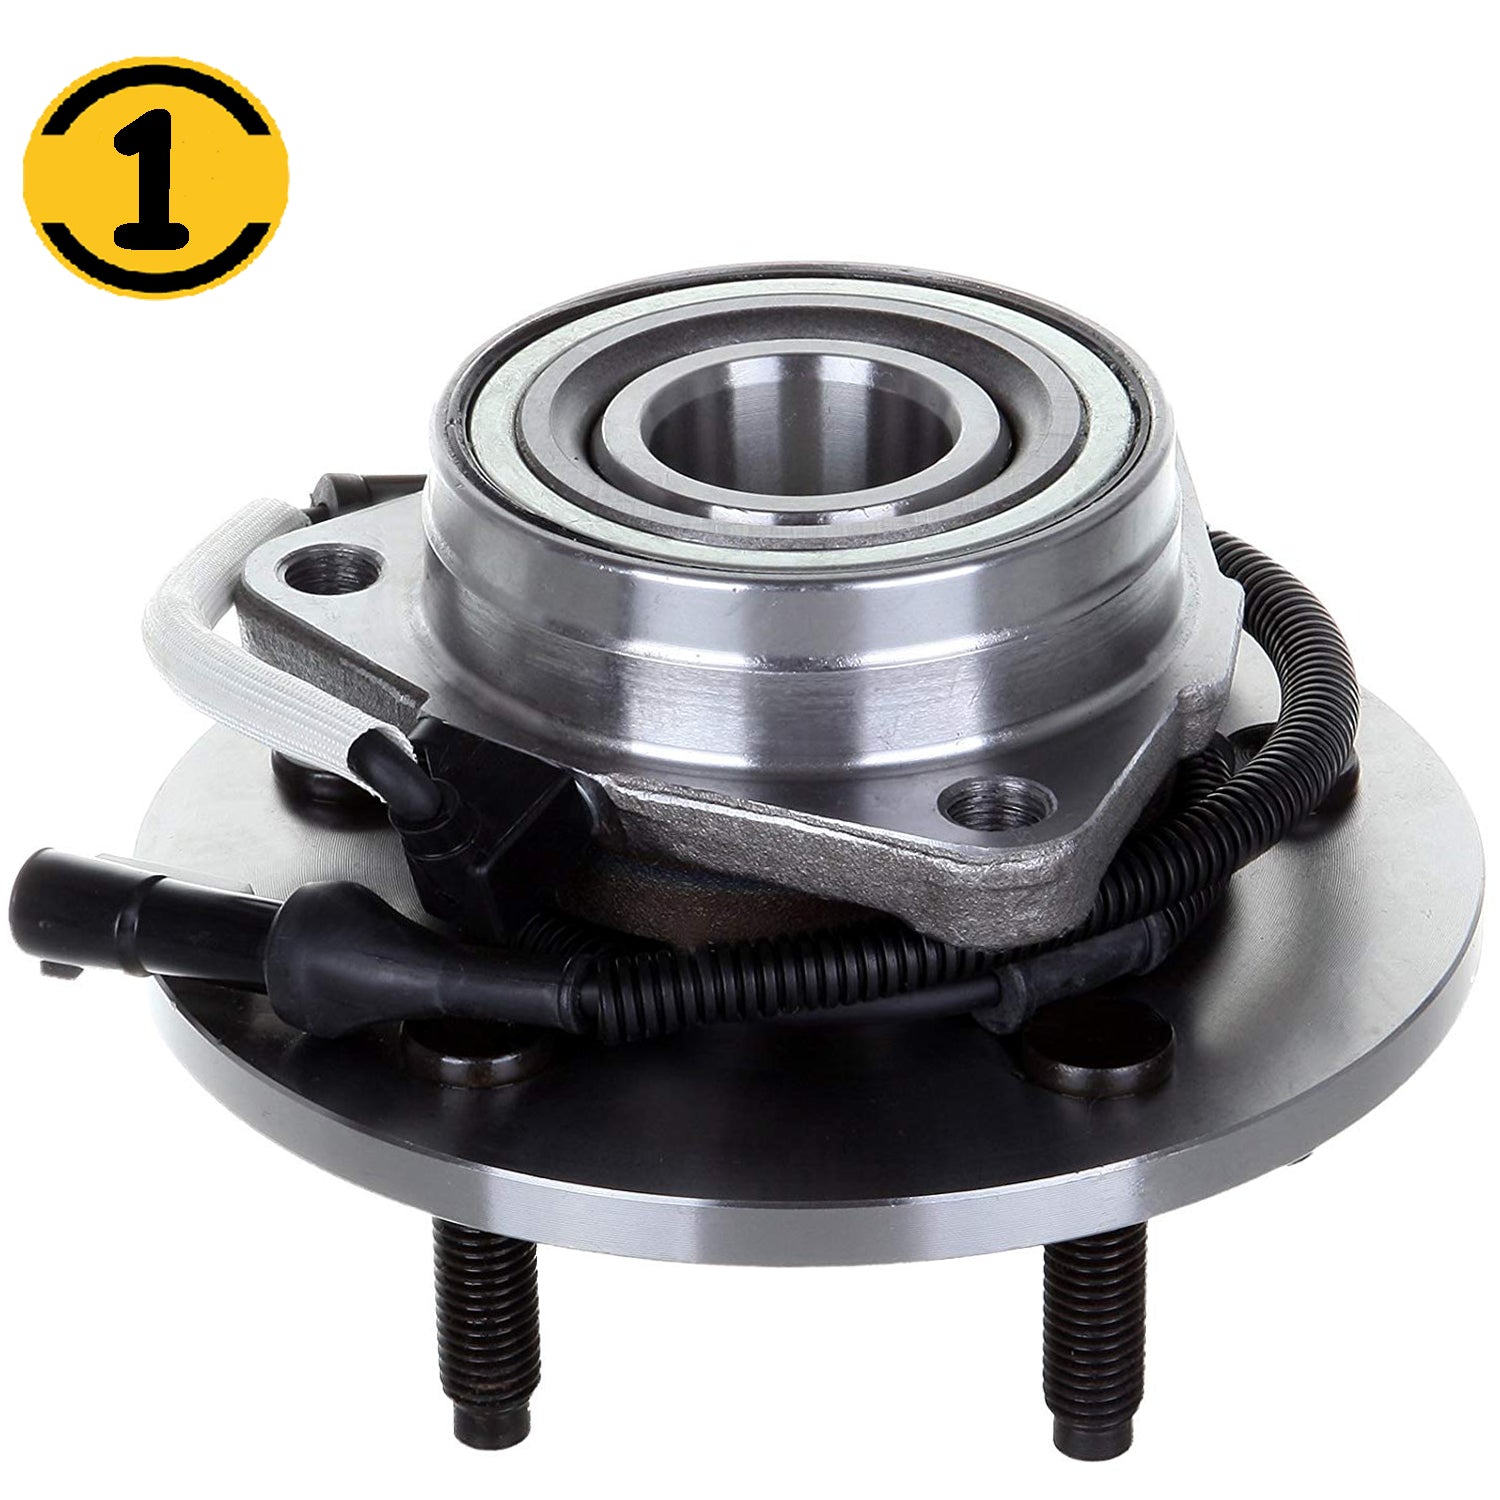 MotorbyMotor 515031 Front Wheel Bearing and Hub Assembly 4WD with 5 Lugs Fits for Ford Expedition 2000 Thru 2002, Lincoln Navigator 2000 Thru 2002 Low-Runout OE Directly Replacement Hub Bearing (4x4) MotorbyMotor